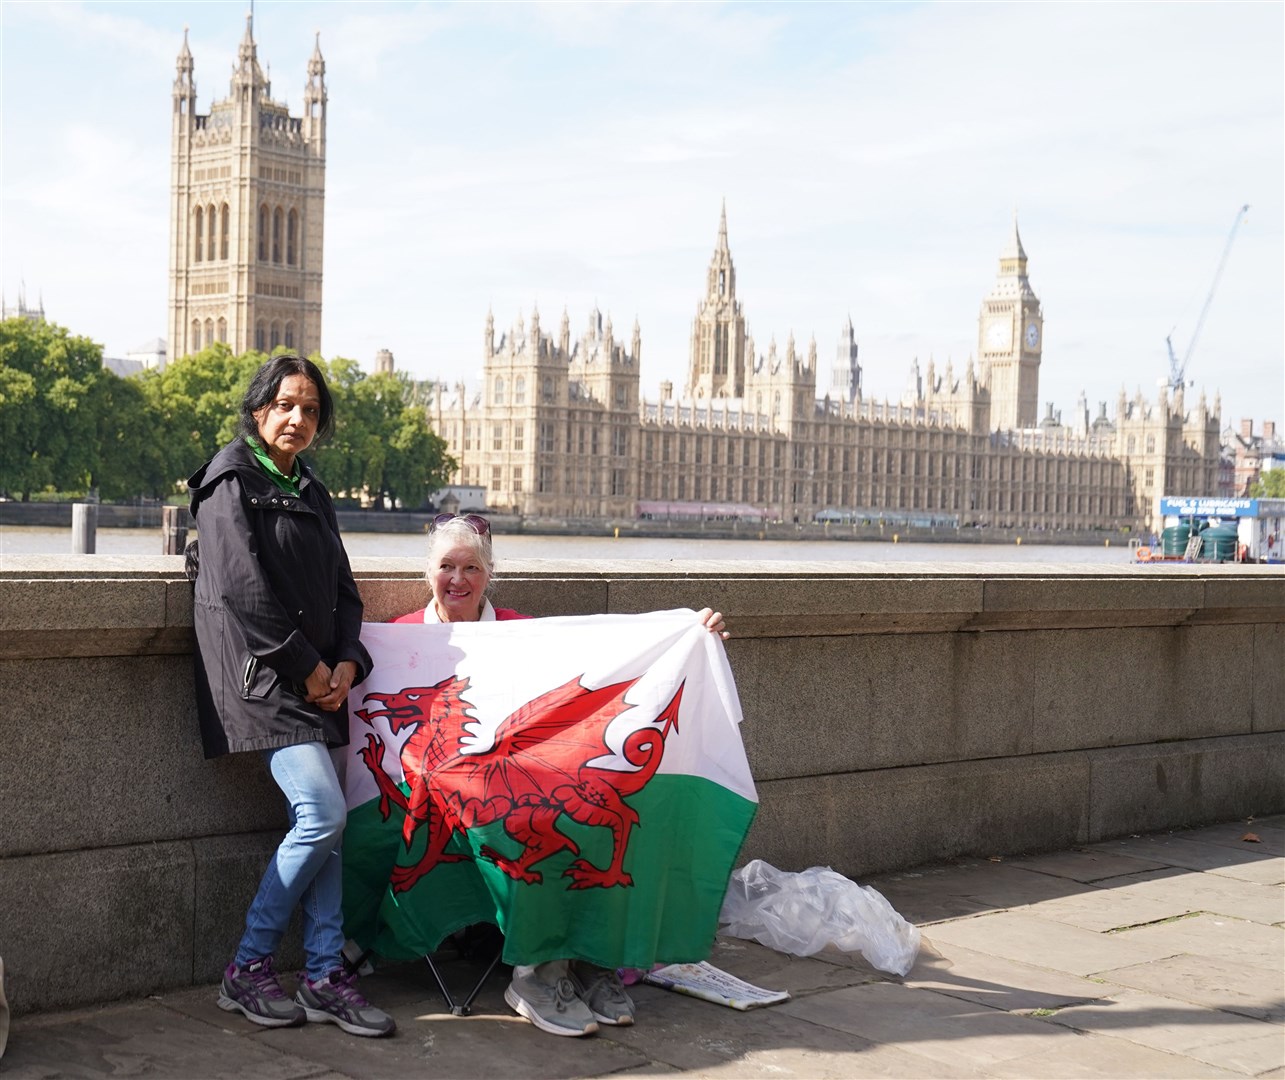 Vanessa Nathakumaran, and Anne (last name not given) are the first two people to arrive on Lambeth Bridge (Stefan Rousseau/PA)